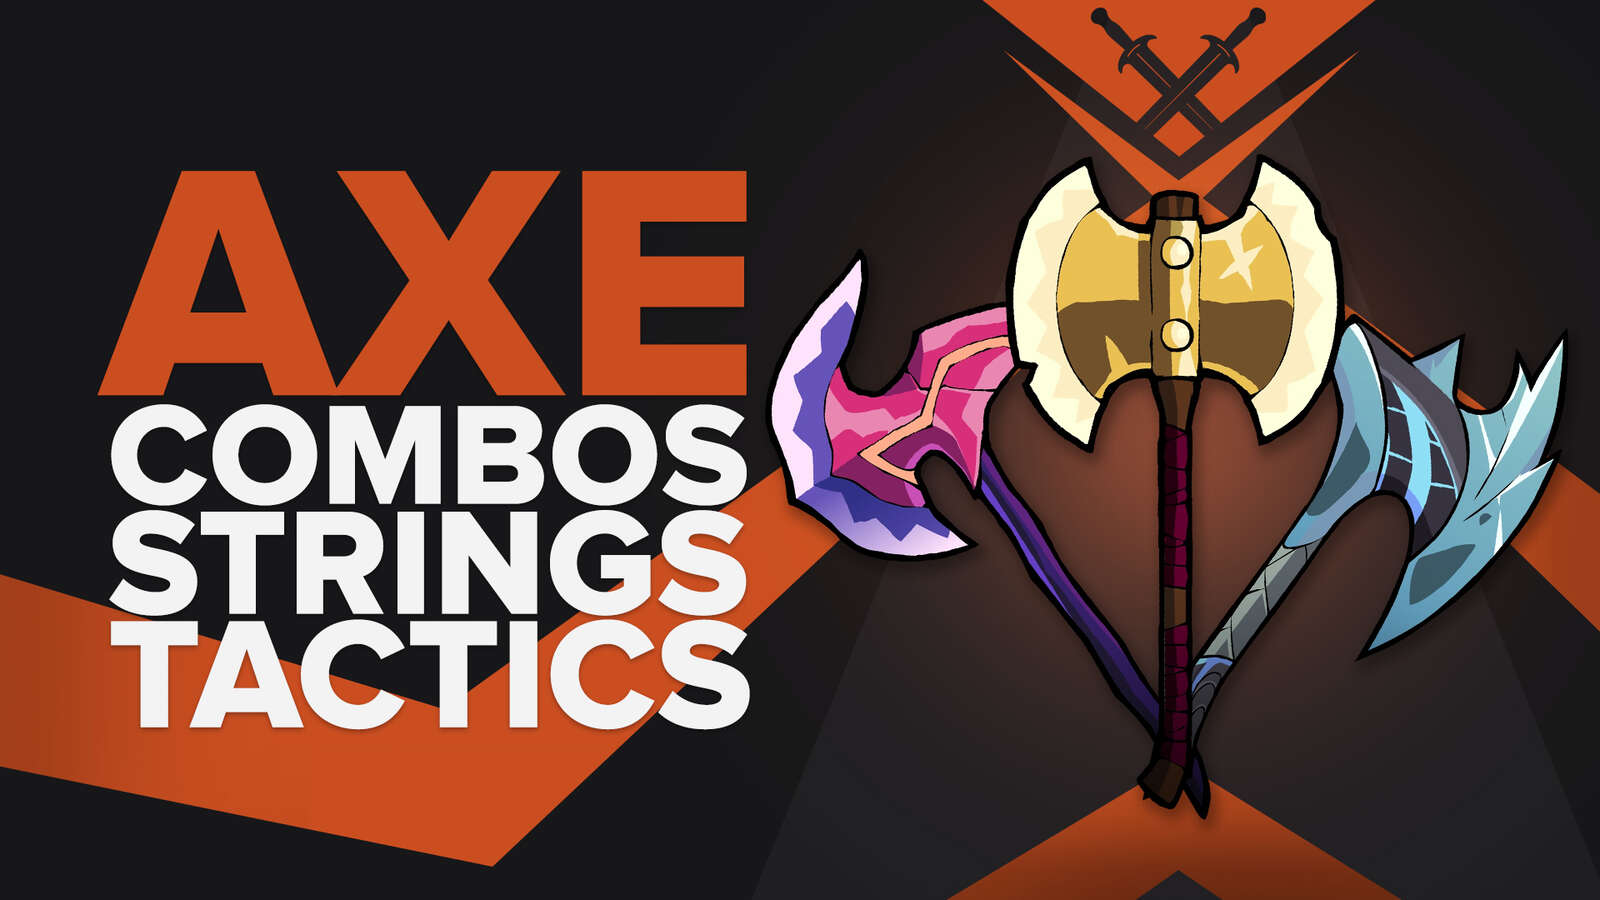 Best Axe Combos, Strings, and Tips in Brawlhalla